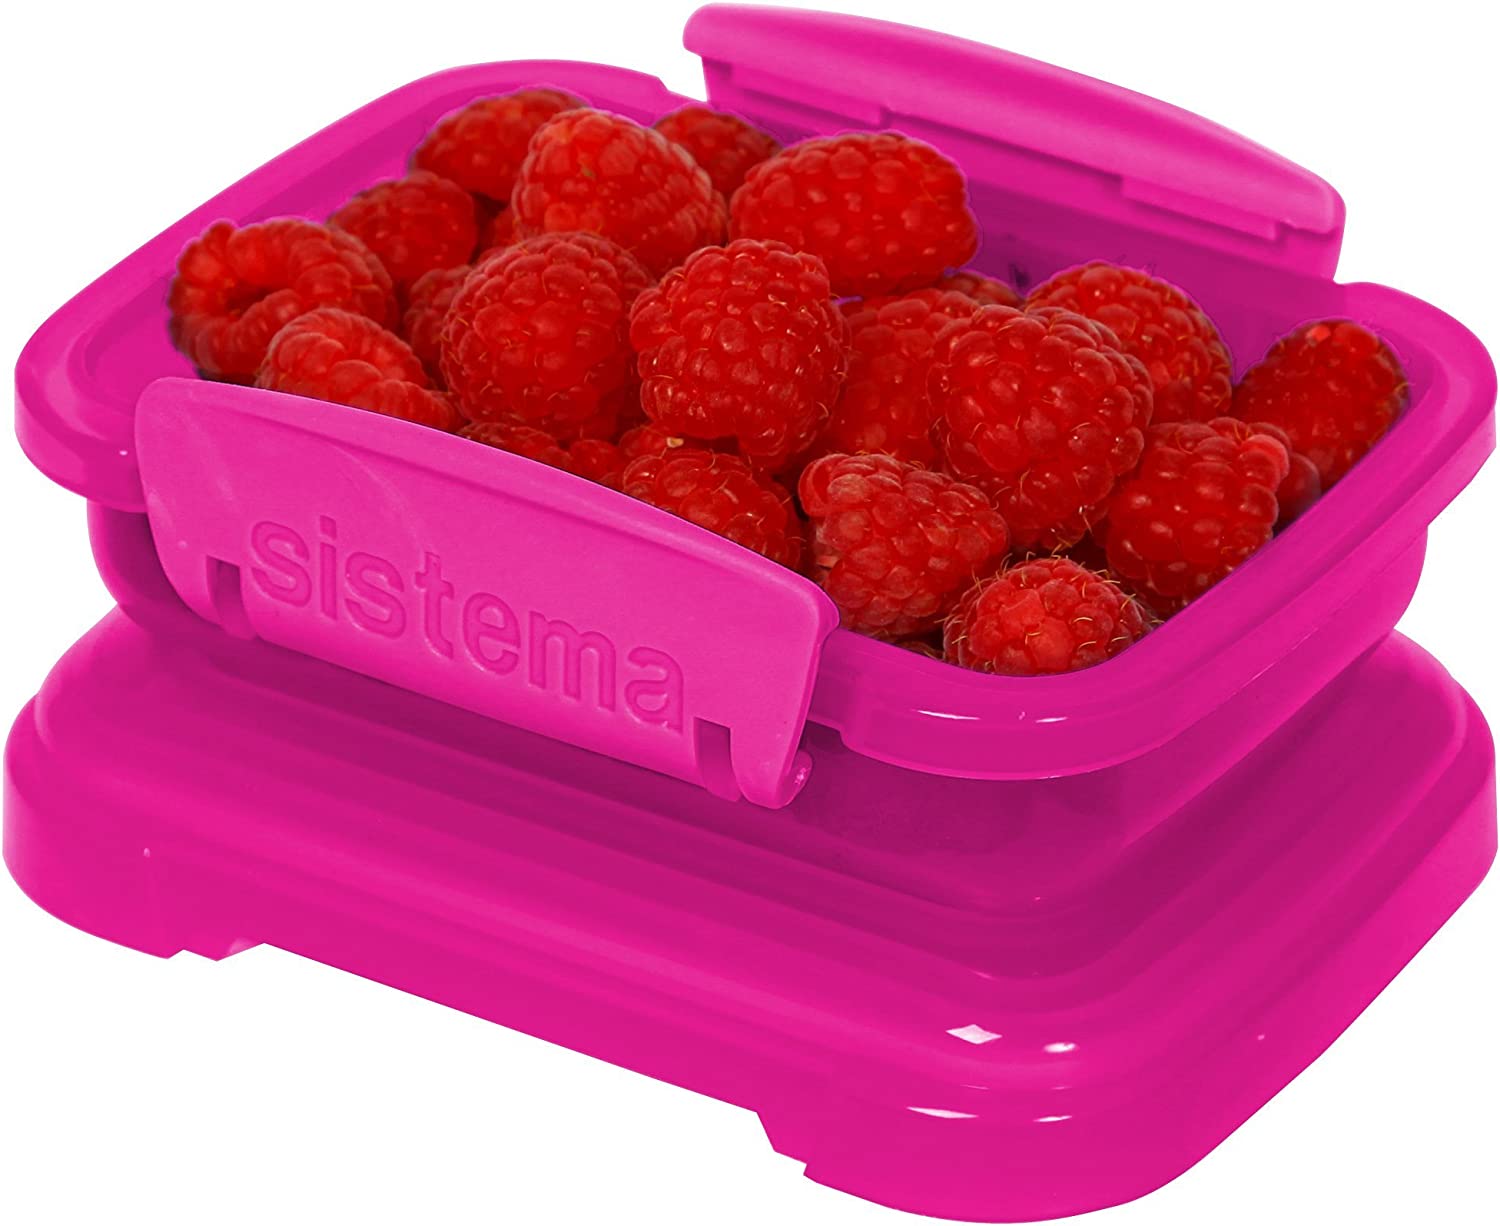 Sistema 41524 Lunch Collection Food storage containers, Blue, Green, Pink